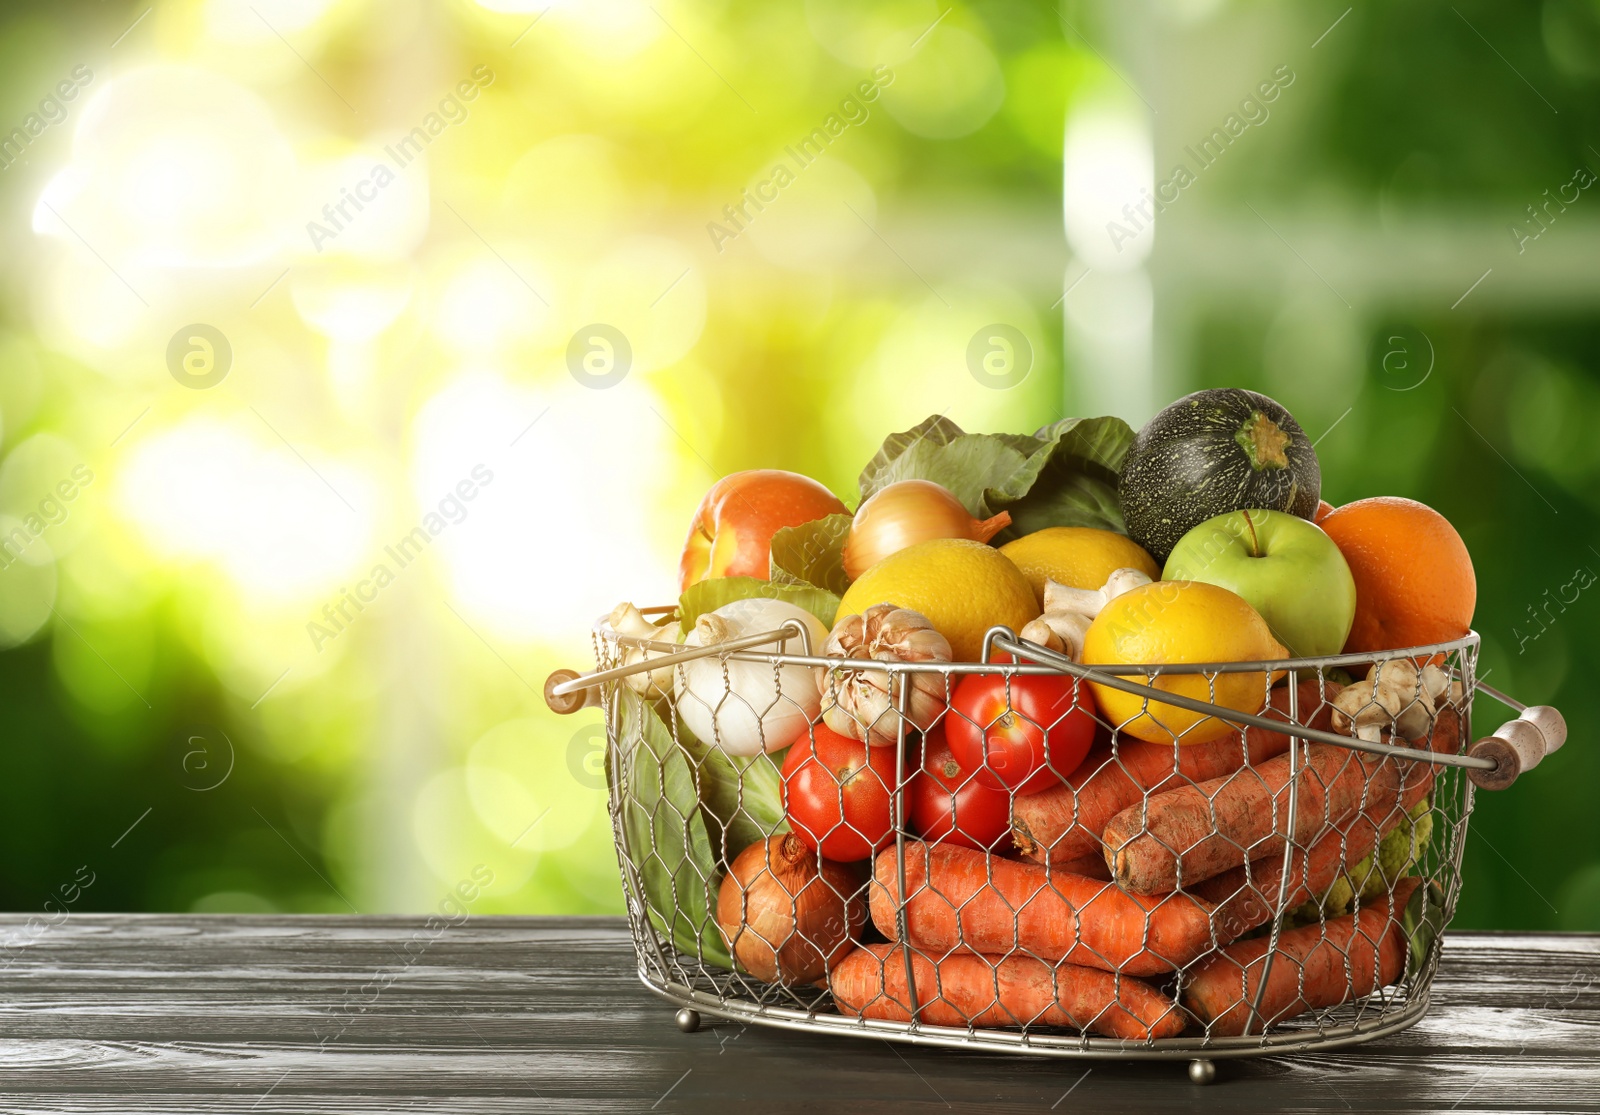 Image of Variety of fresh delicious vegetables and fruits in basket on table against blurred background, space for text